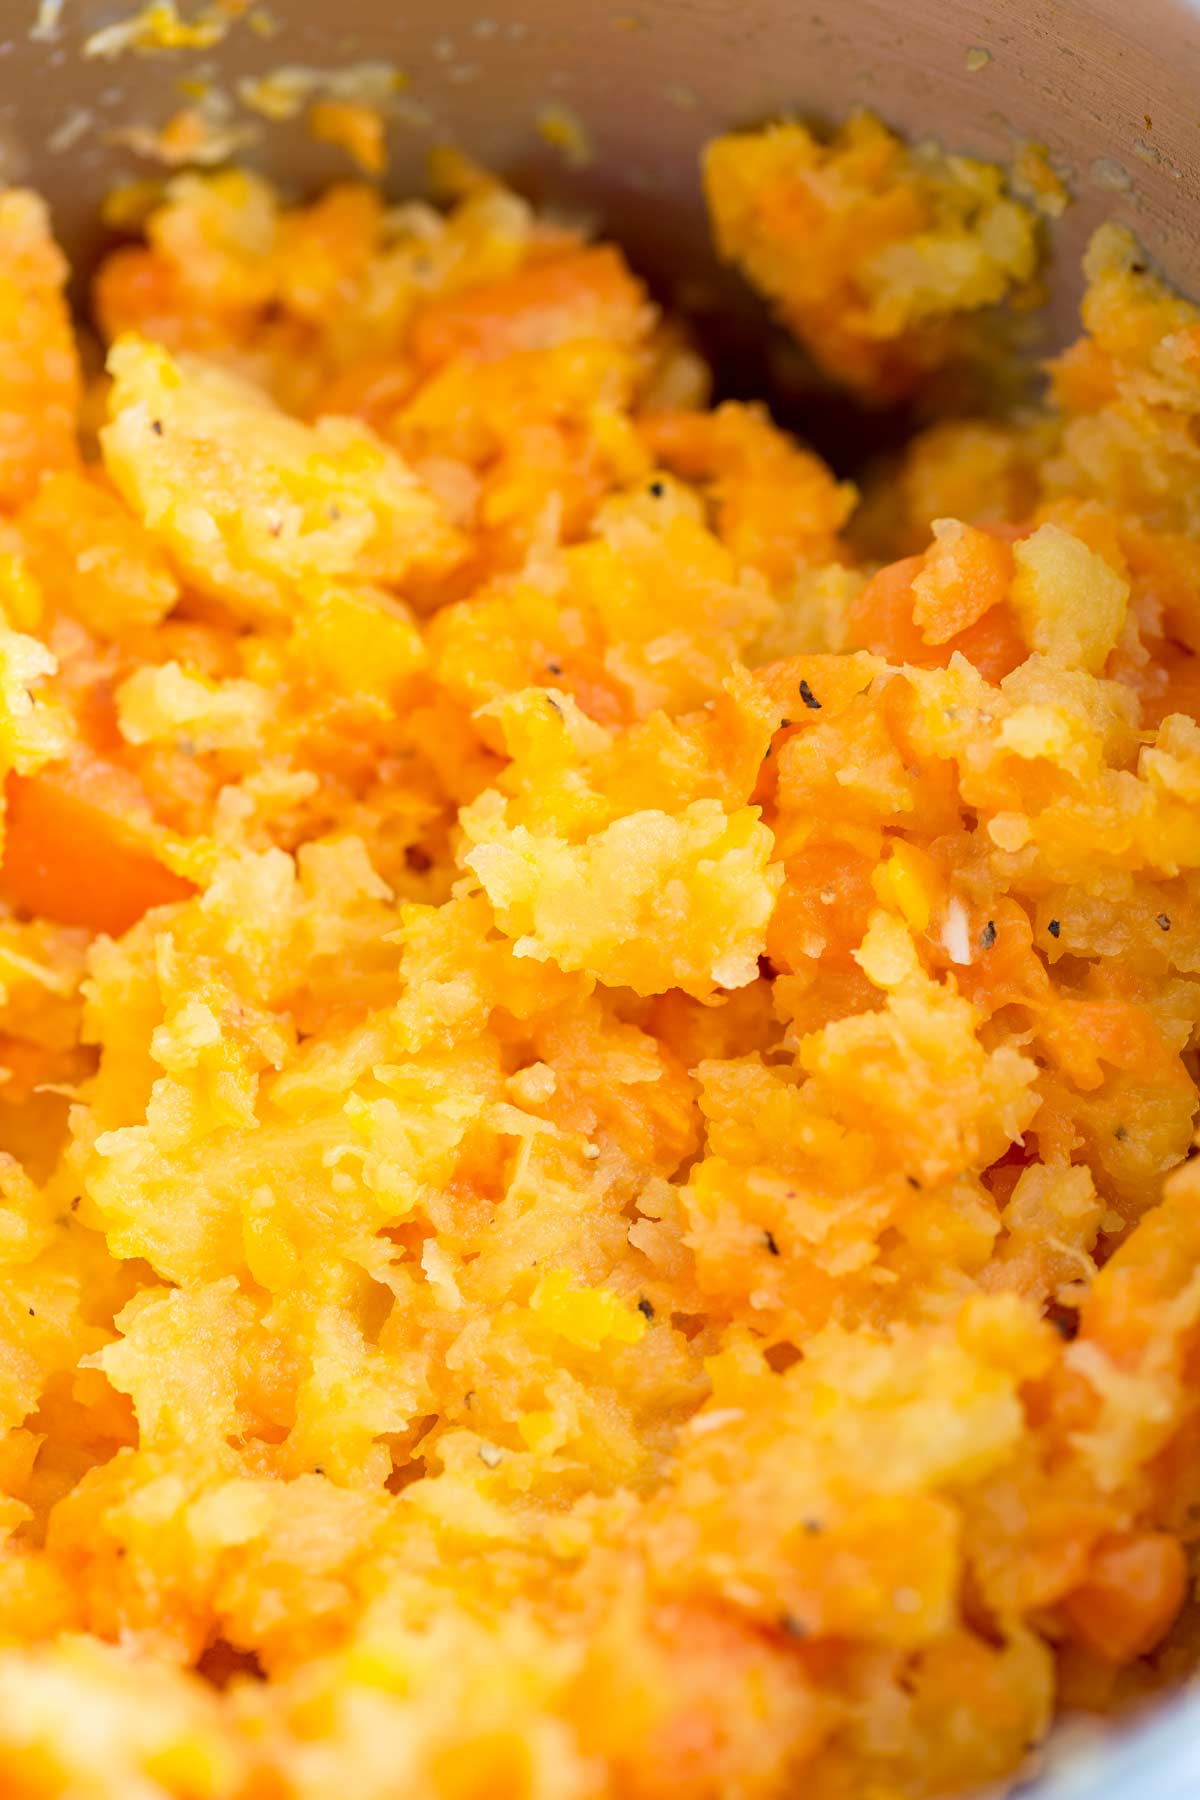 close up of mashed rutabaga and carrot showing the rough texture